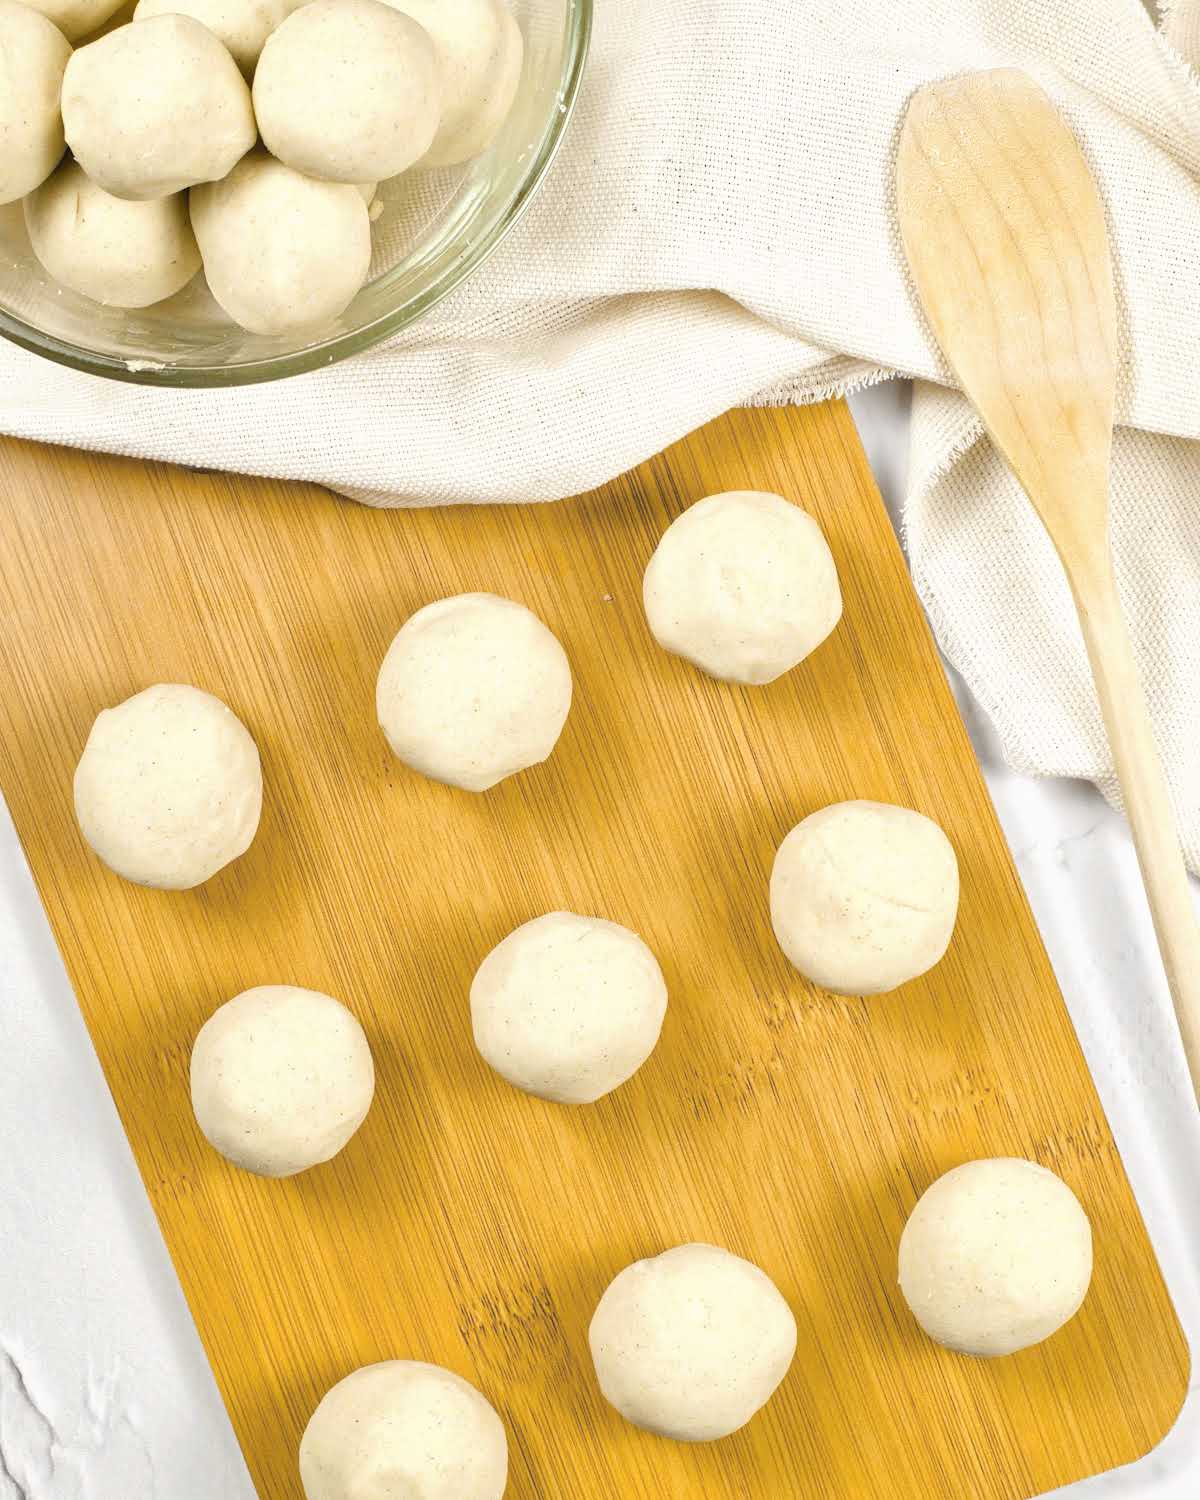 Wooden board with masa harina dough balls. White cloth and wooden spoon.